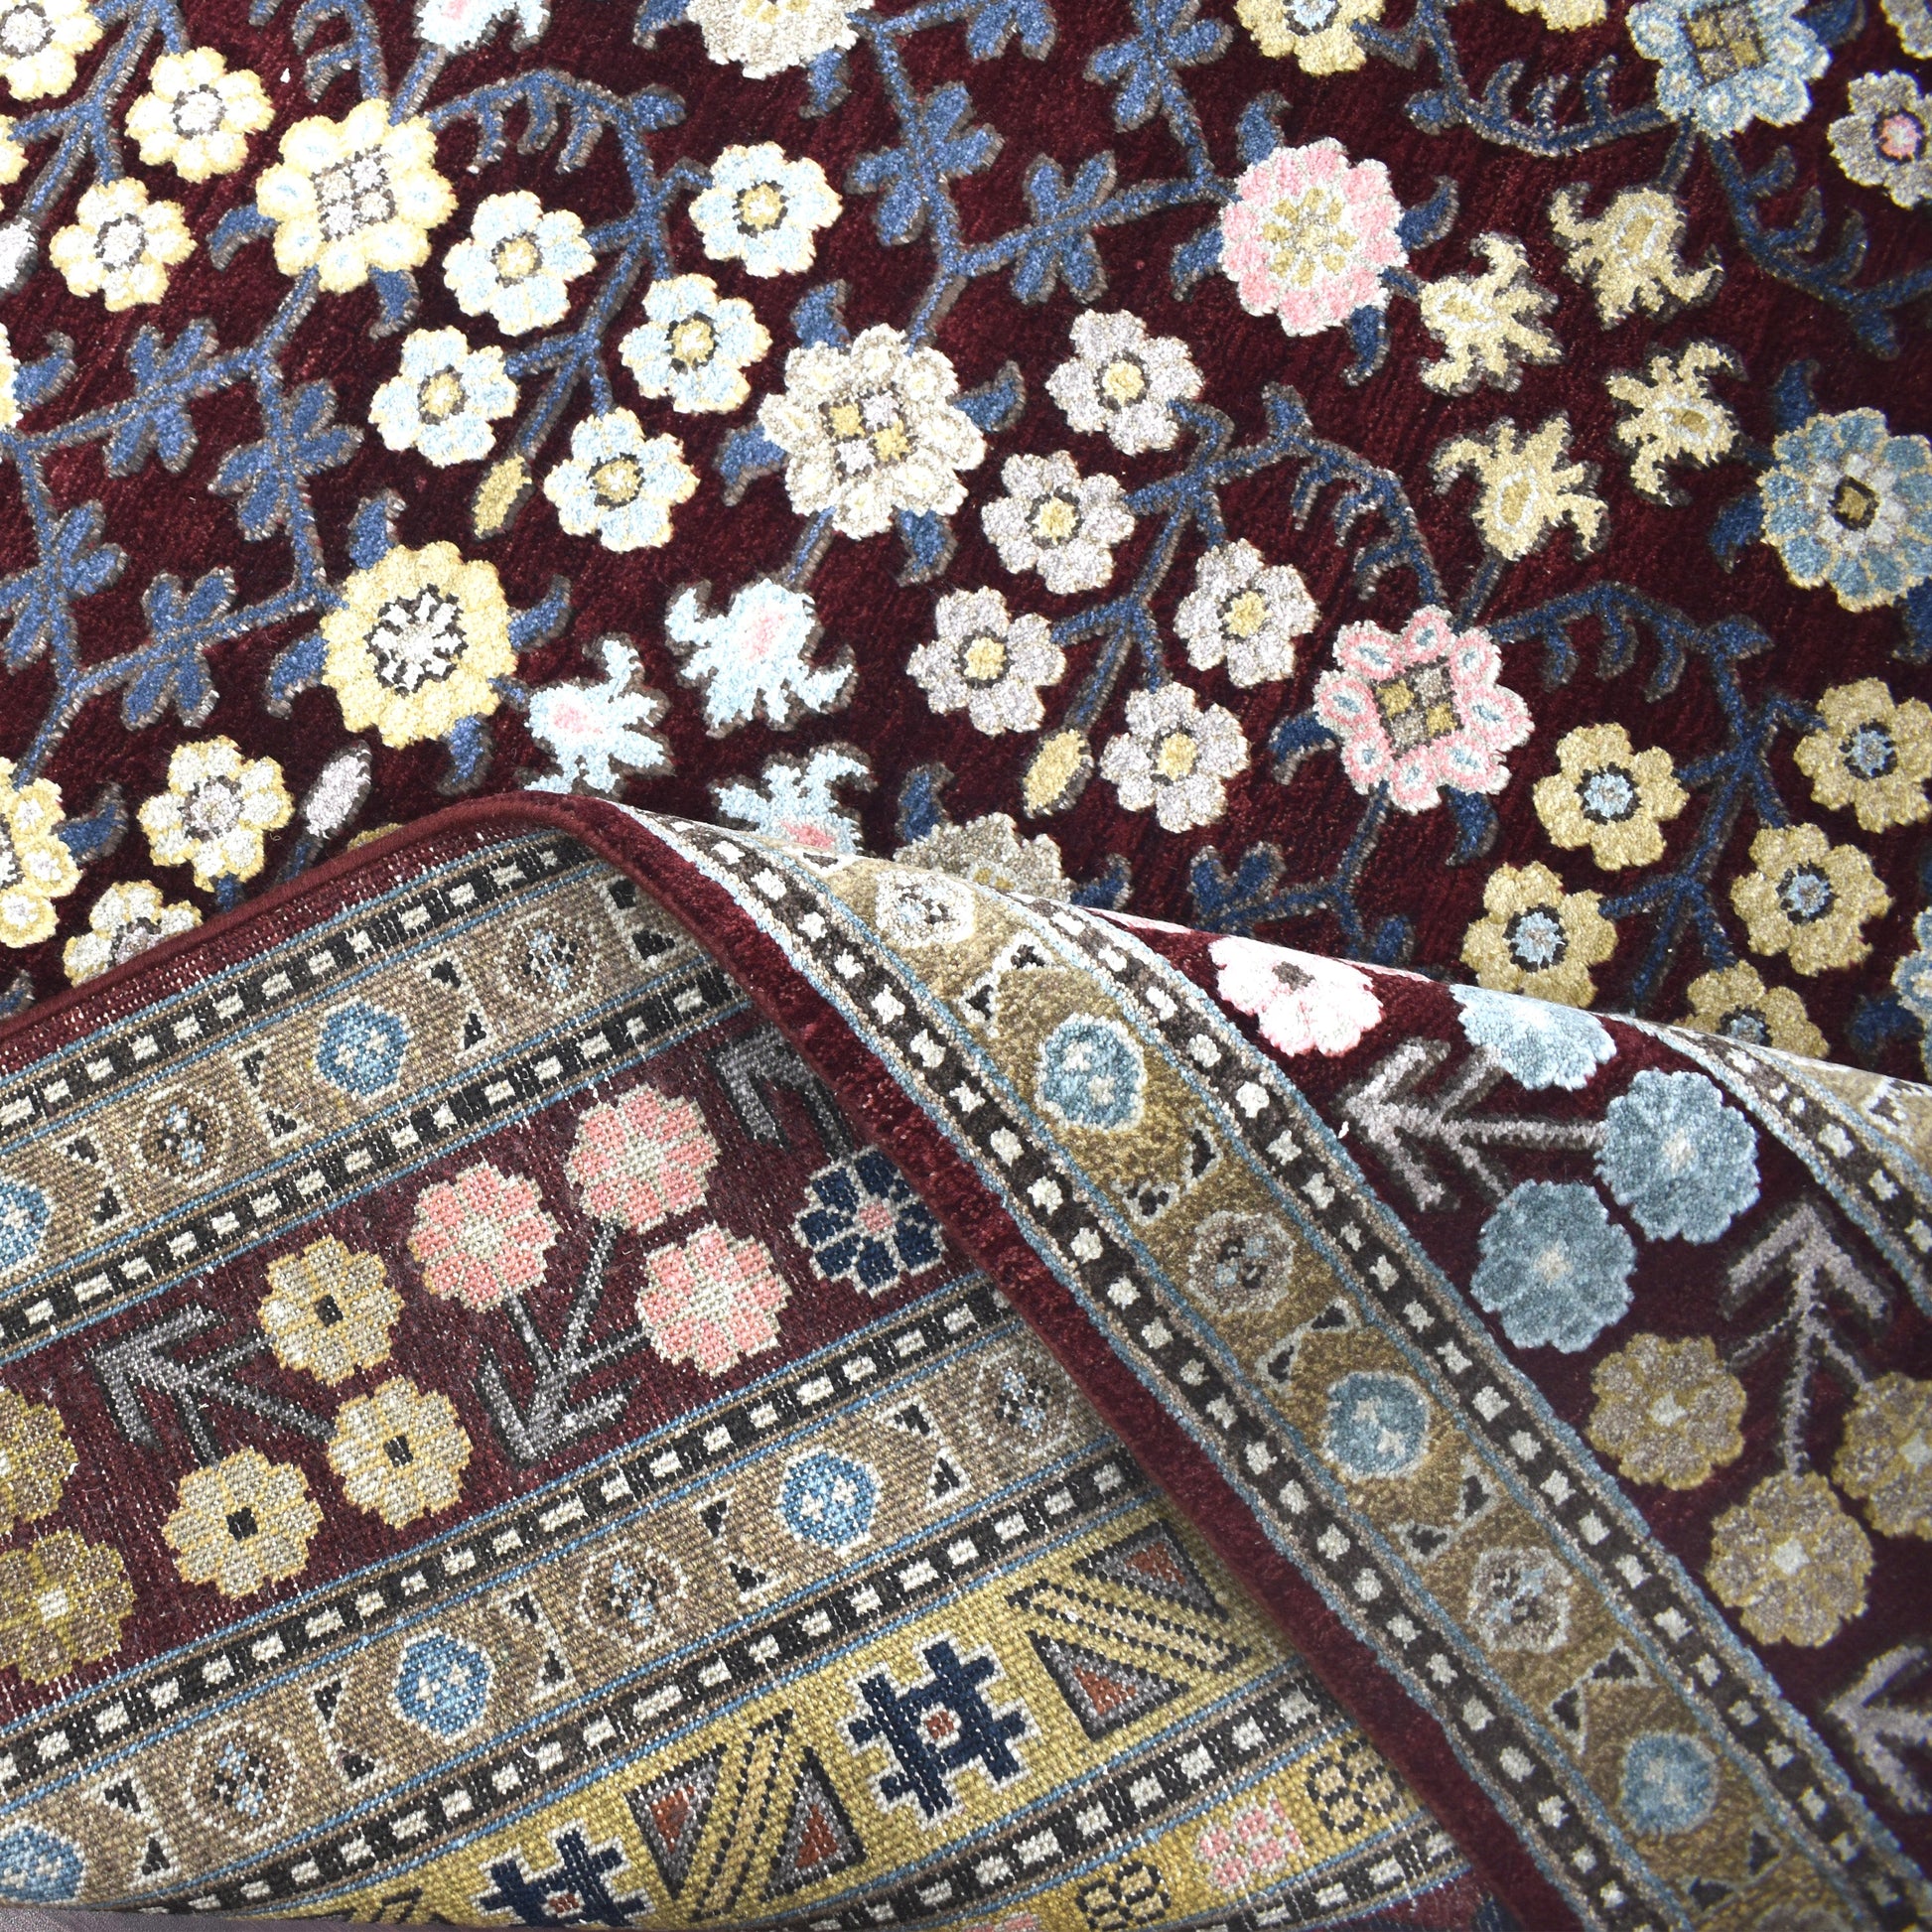 Get trendy with Bouquet Samarkand Red, Camel and Multy Transitional Silk and Wool  Handknotted Area Rug - Transitional Rugs available at Jaipur Oriental Rugs. Grab yours for $5899.00 today!